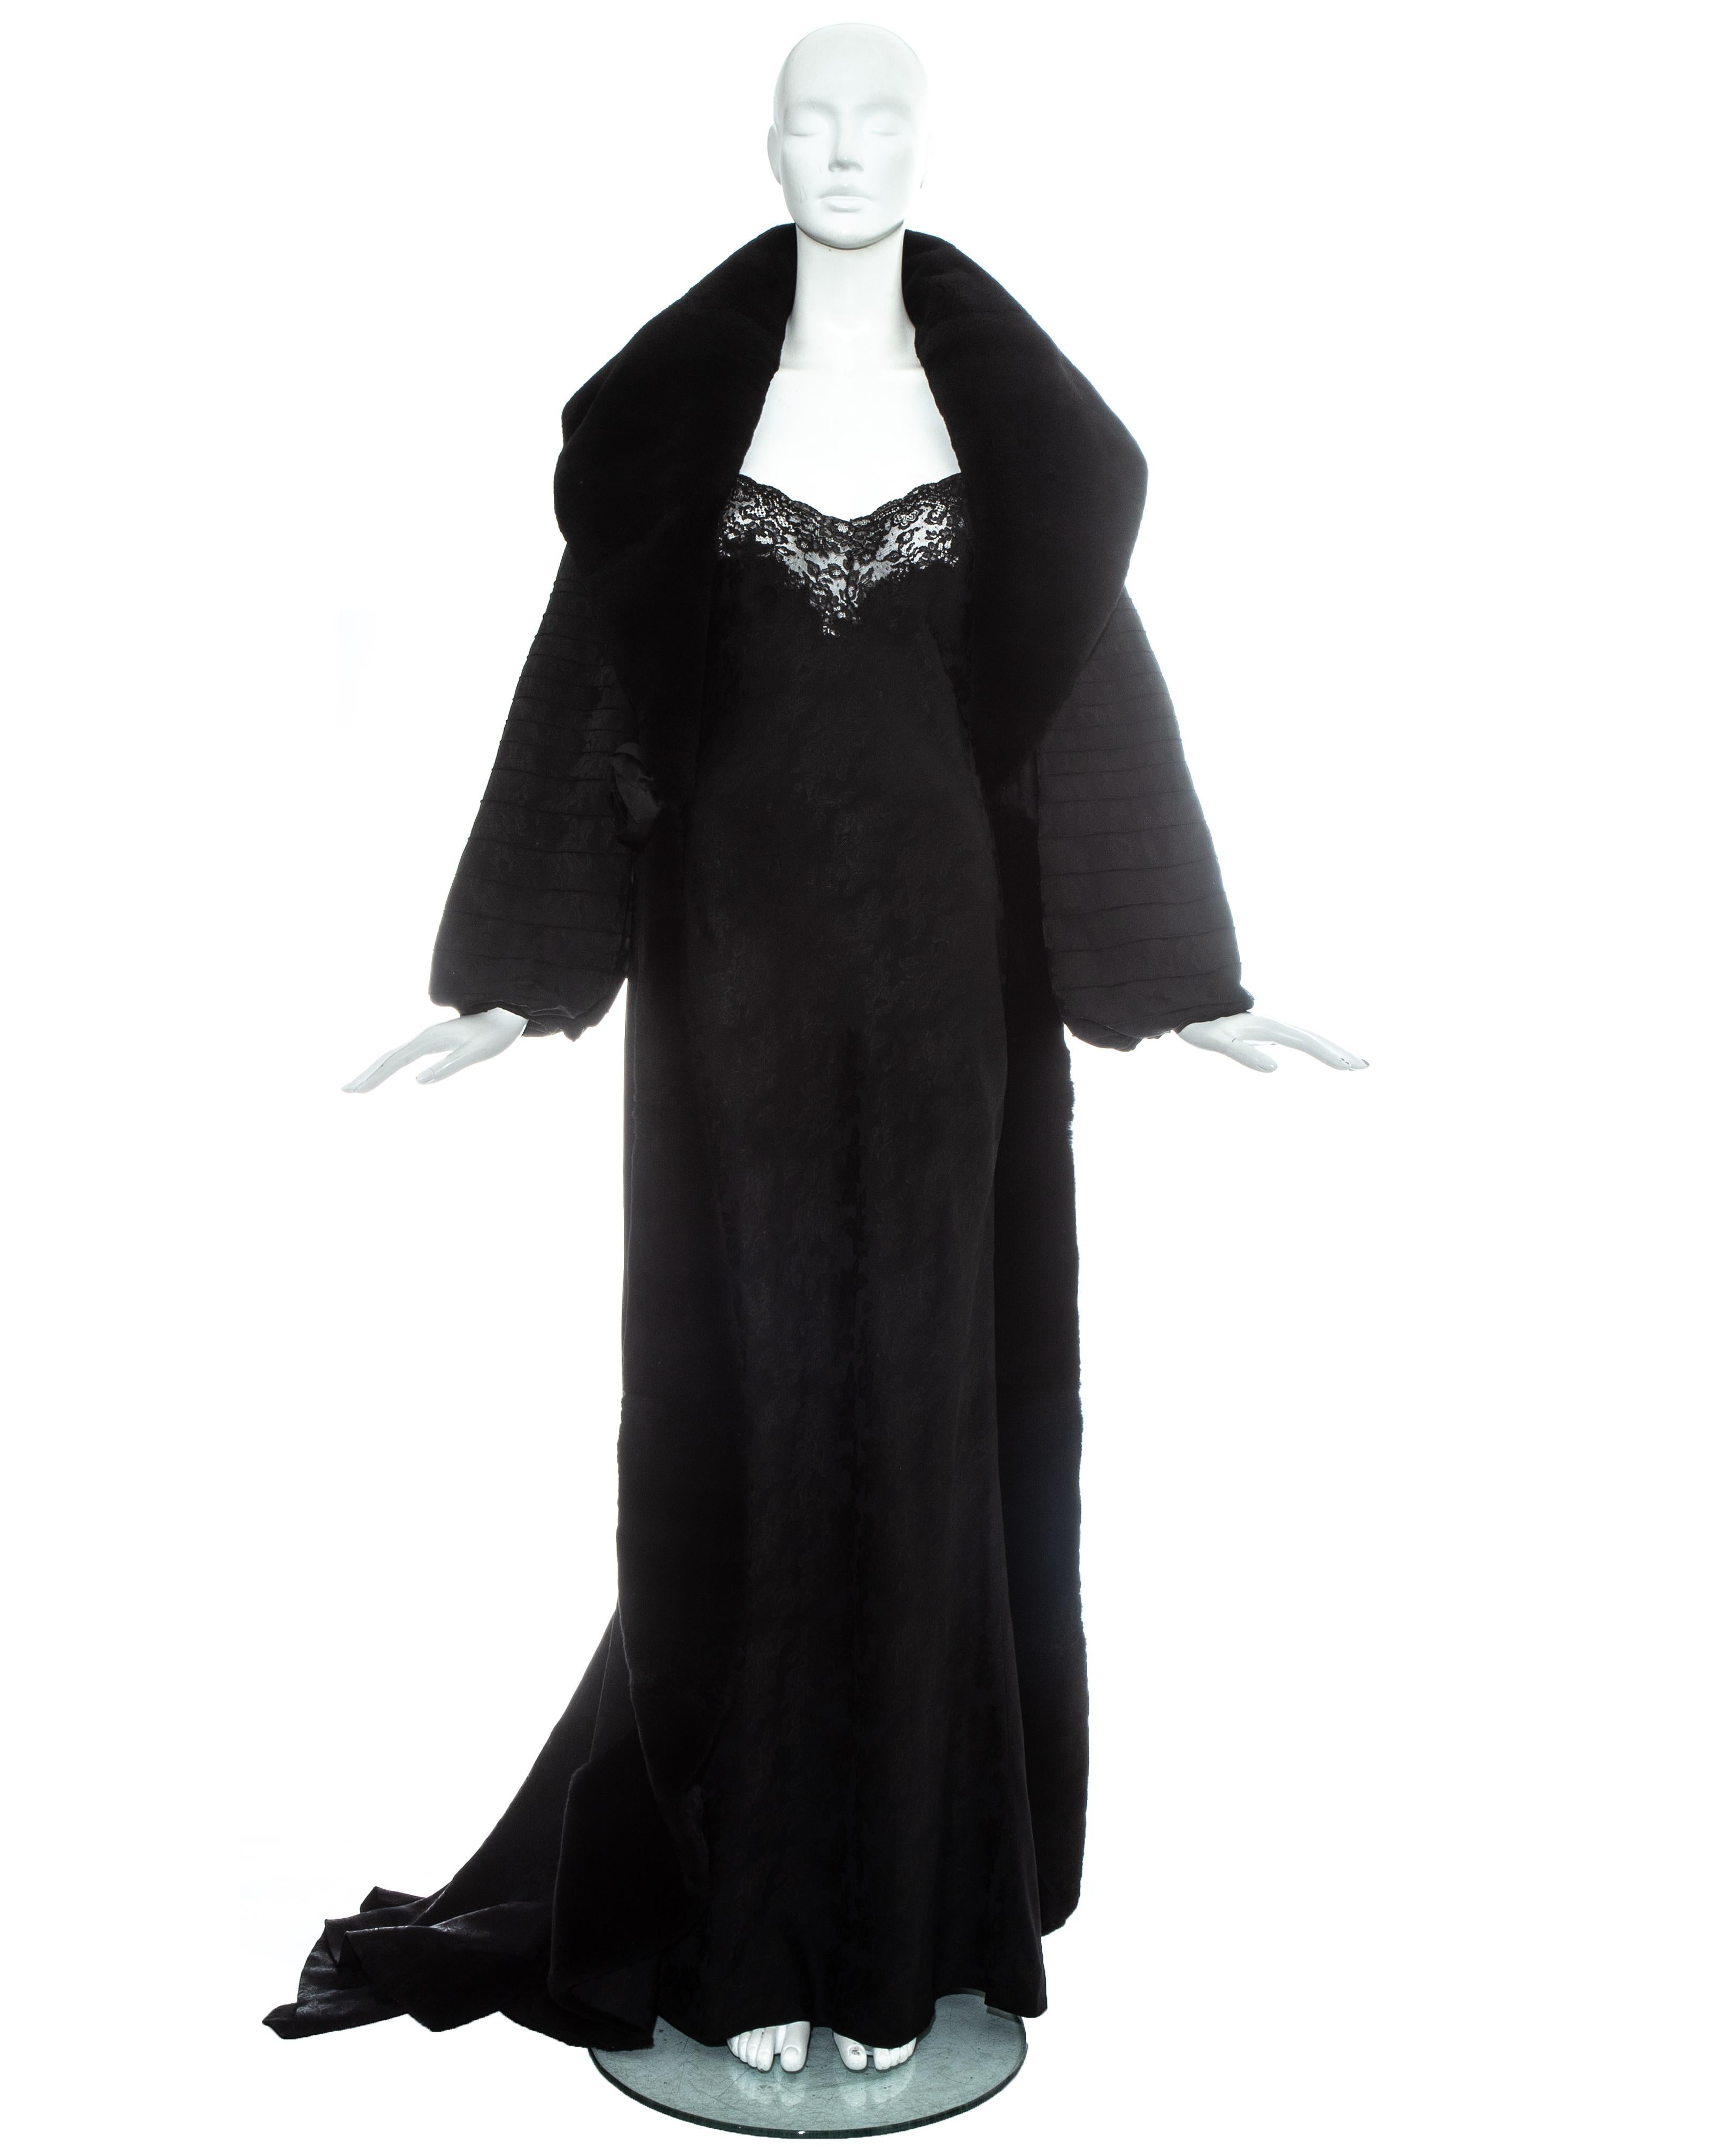 Christian Dior by John Galliano black lace and fur dress and robe, fw 1998 In Good Condition For Sale In London, London